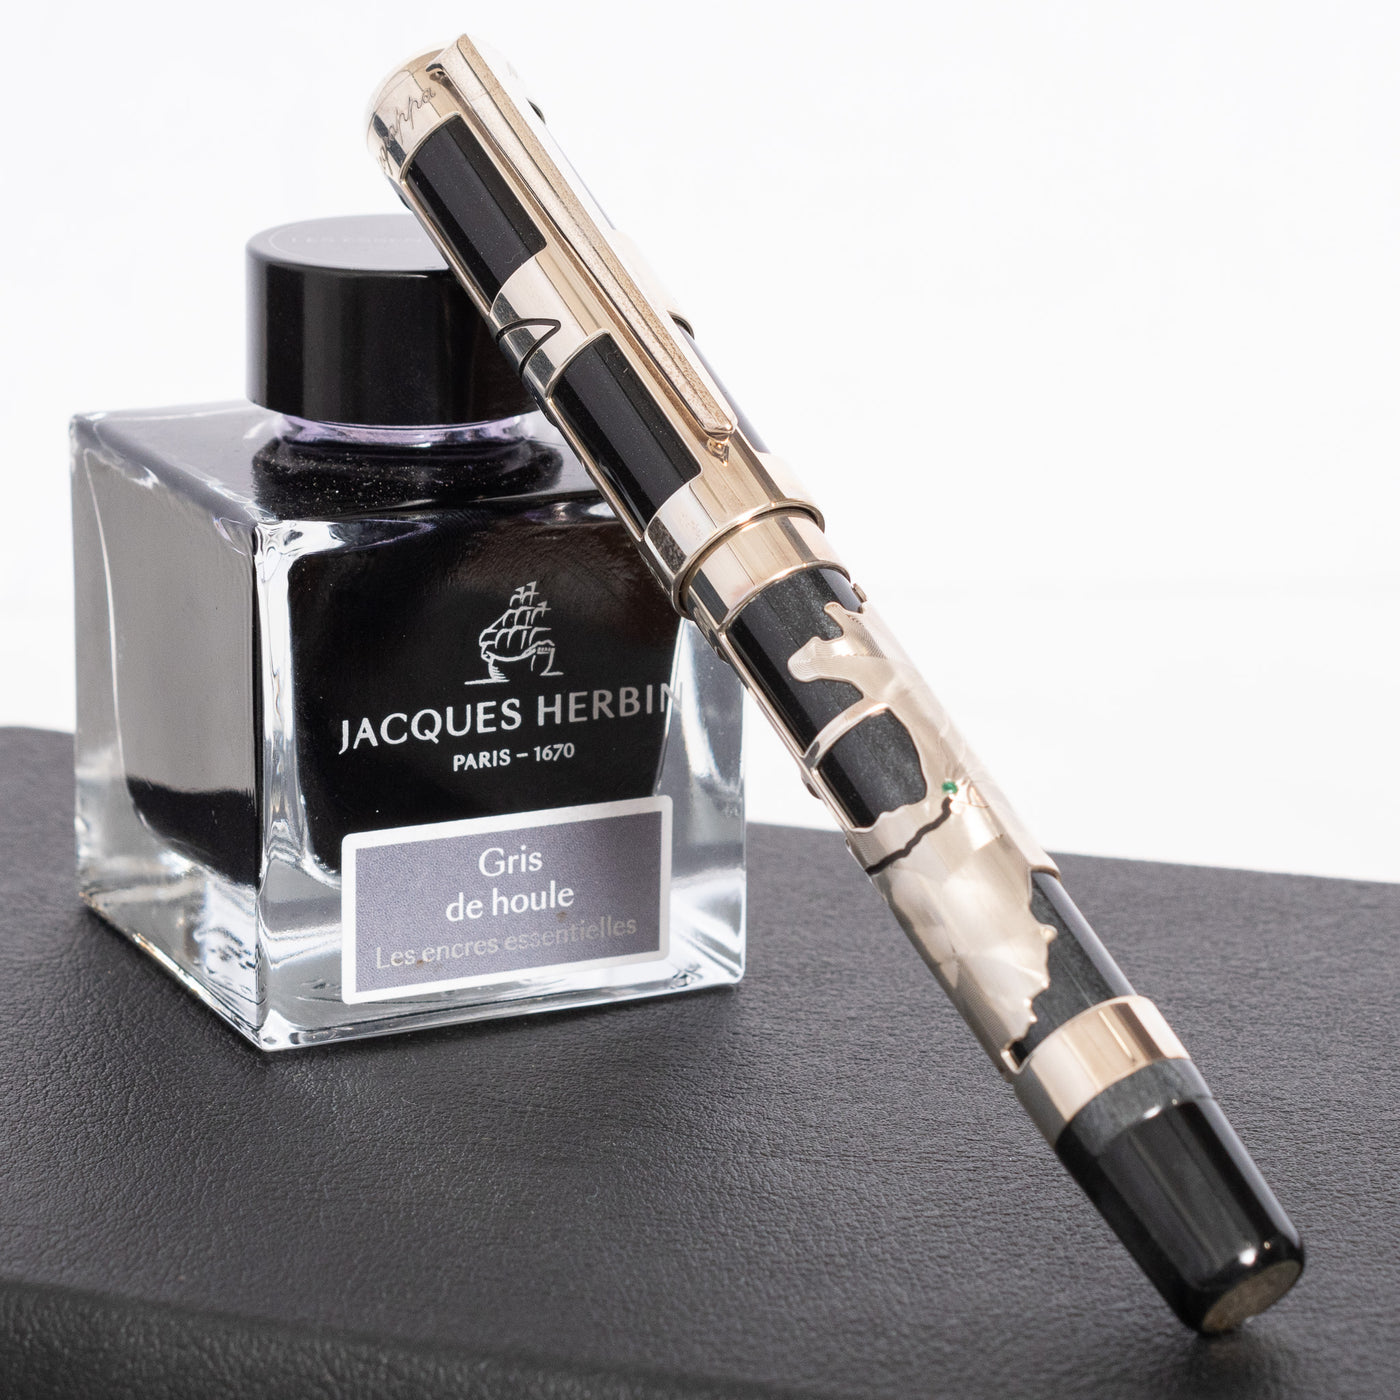 Montegrappa Paolo Coelho Limited Edition Fountain Pen capped